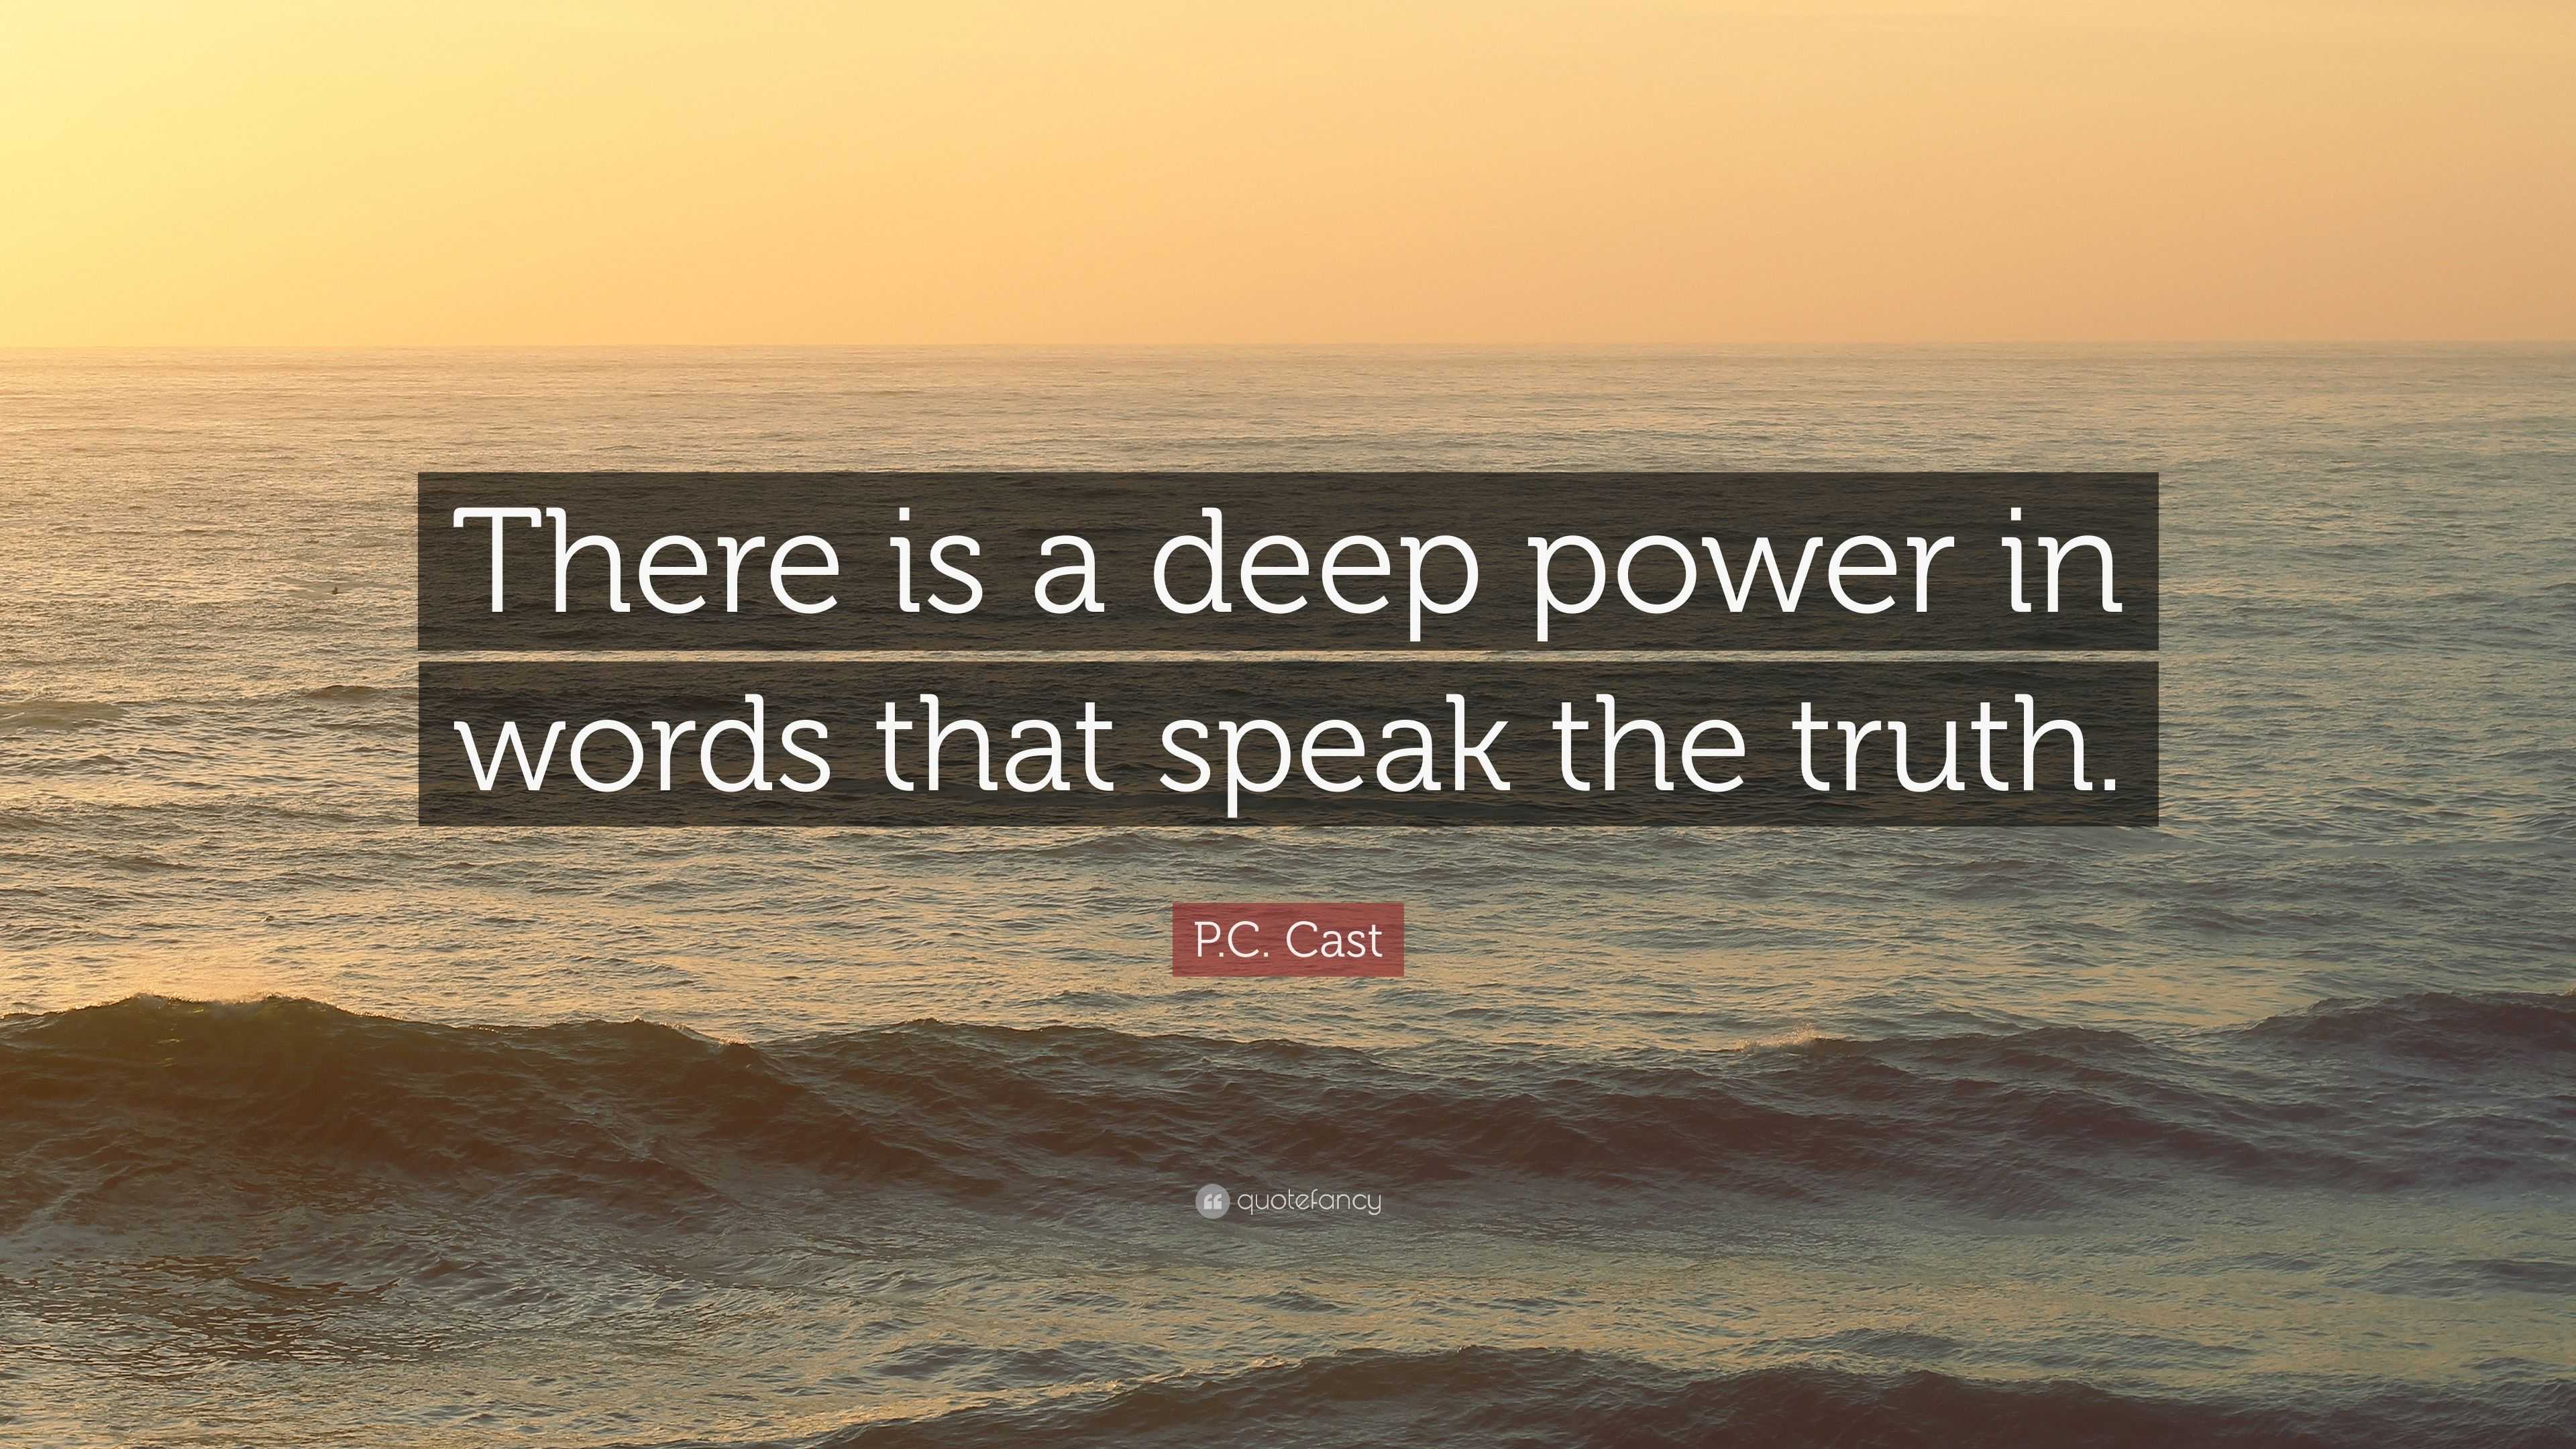 P.C. Cast Quote “There is a deep power in words that